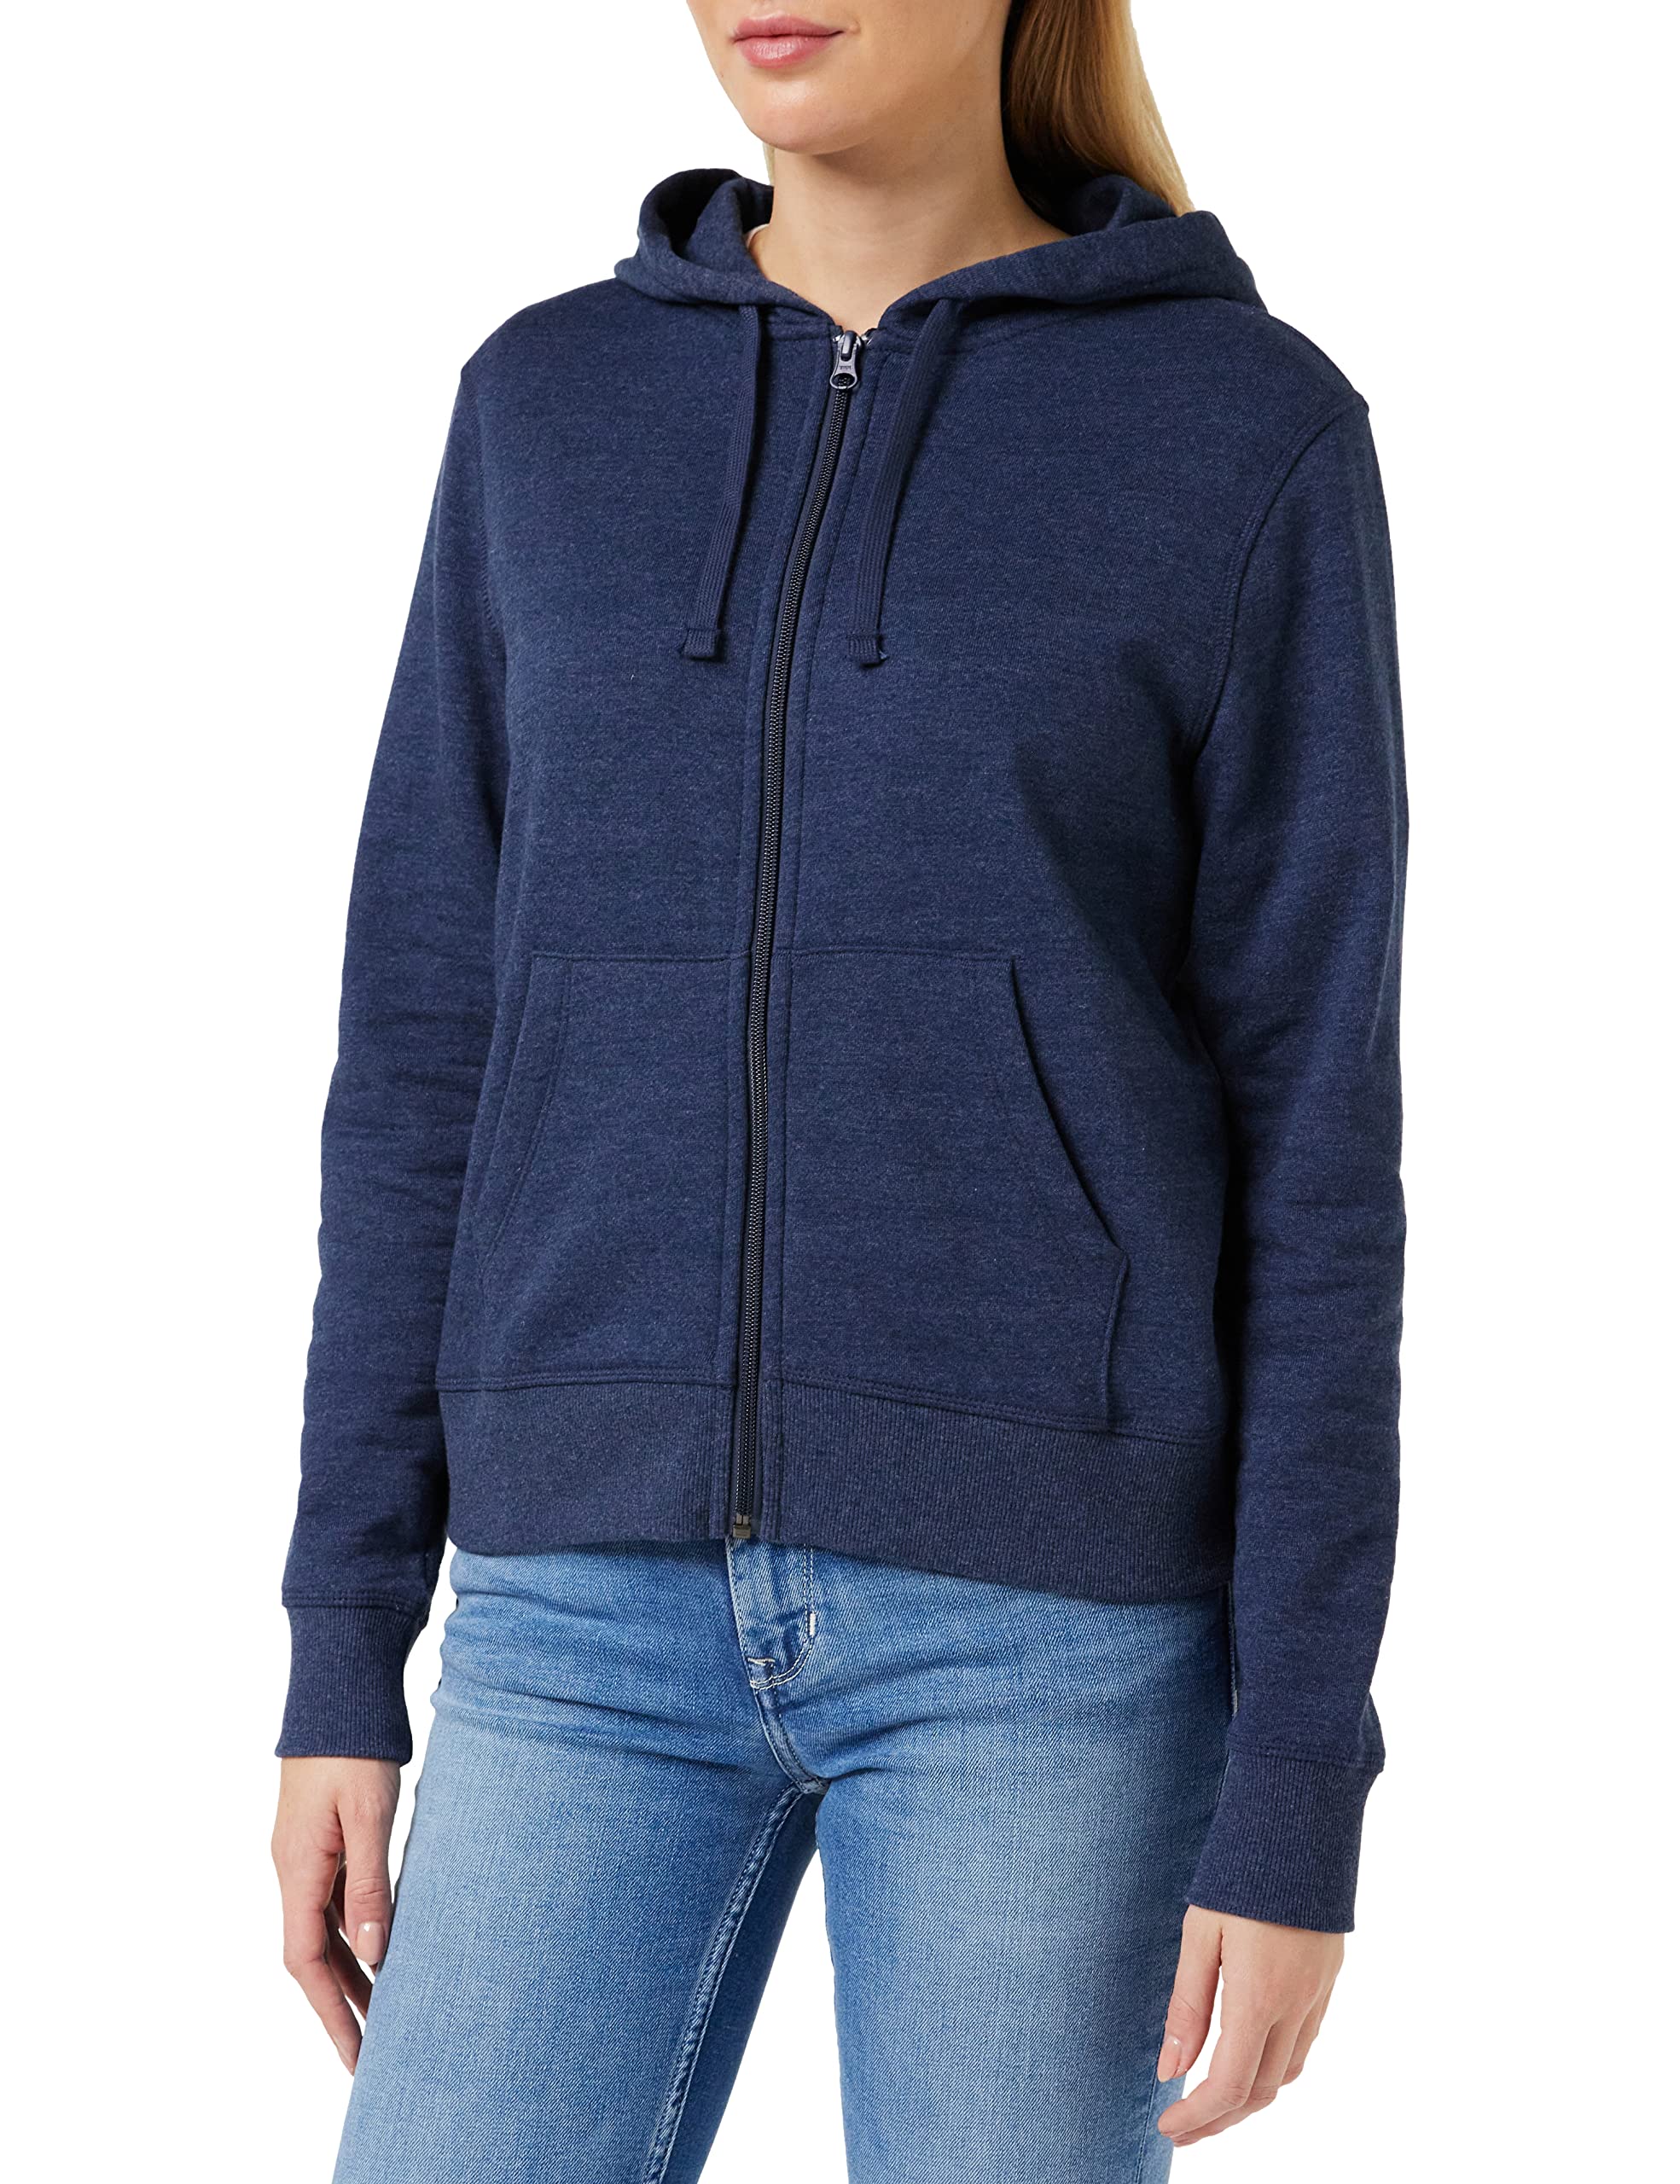 Amazon Essentials Women's French Terry Fleece Full-Zip Hoodie $8.30 + Free Shipping w/ Prime or on $35+